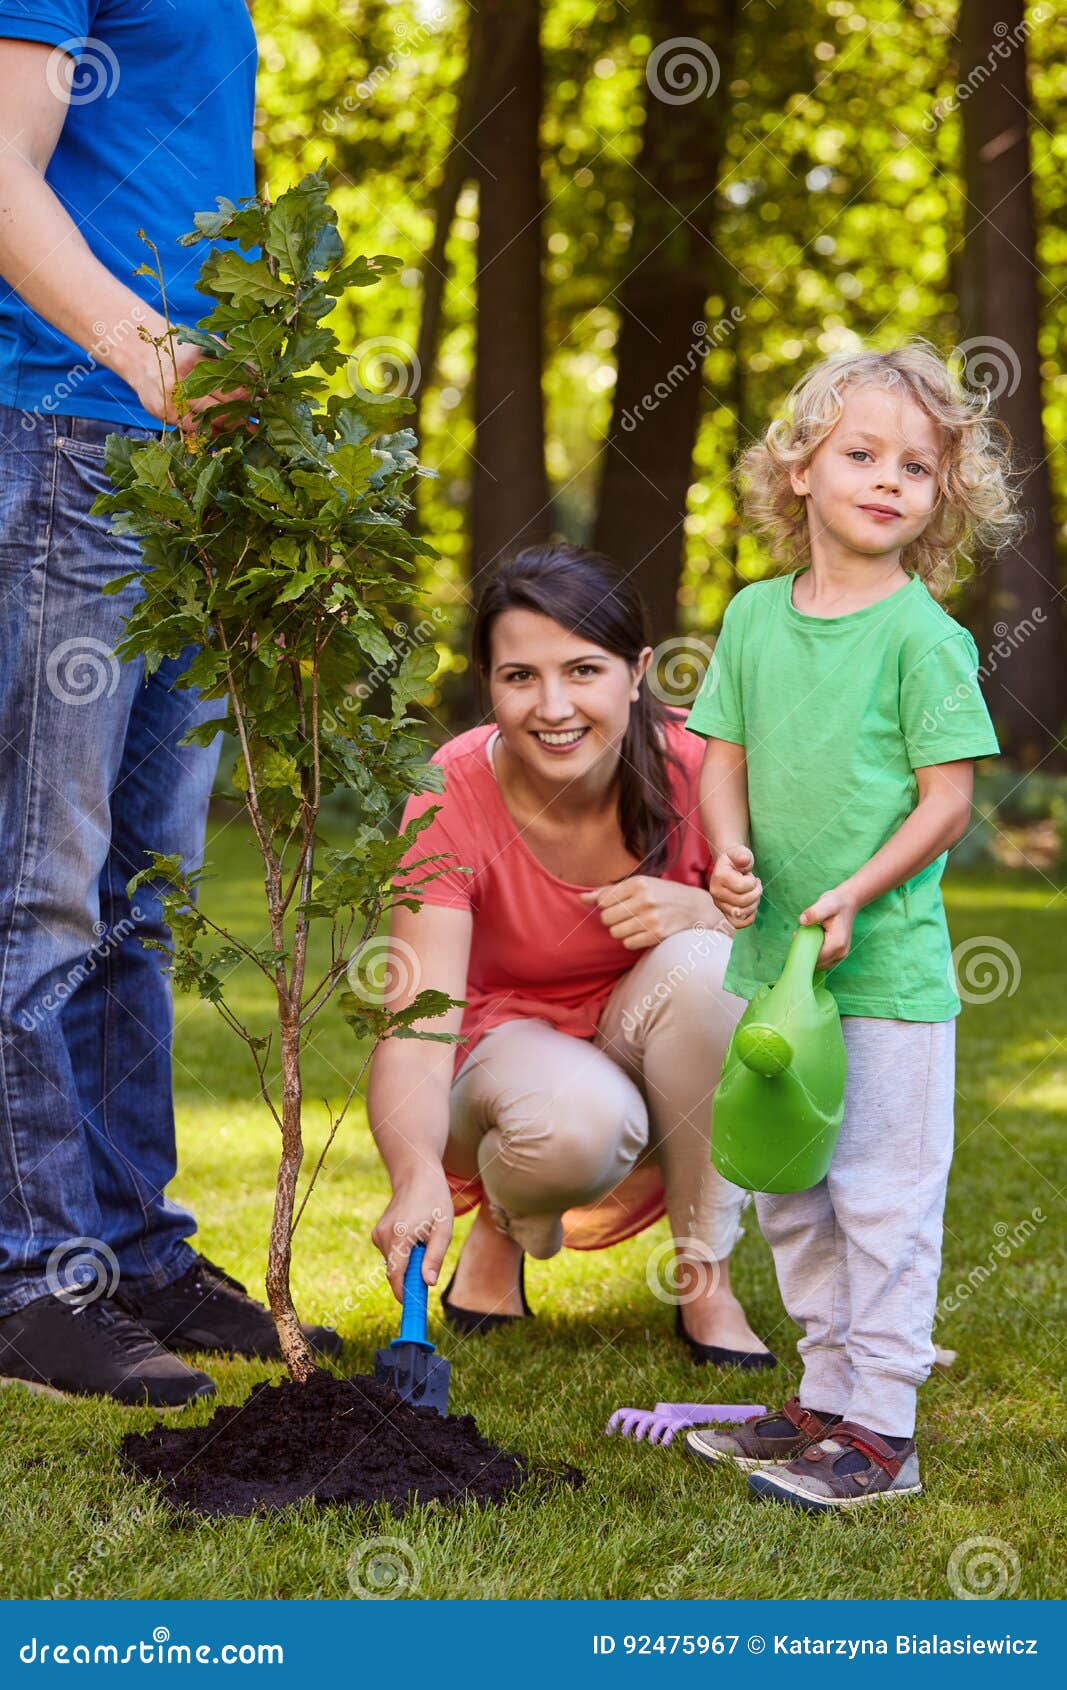 Family Spending Time Together Stock Image - Image of exterior, child ...